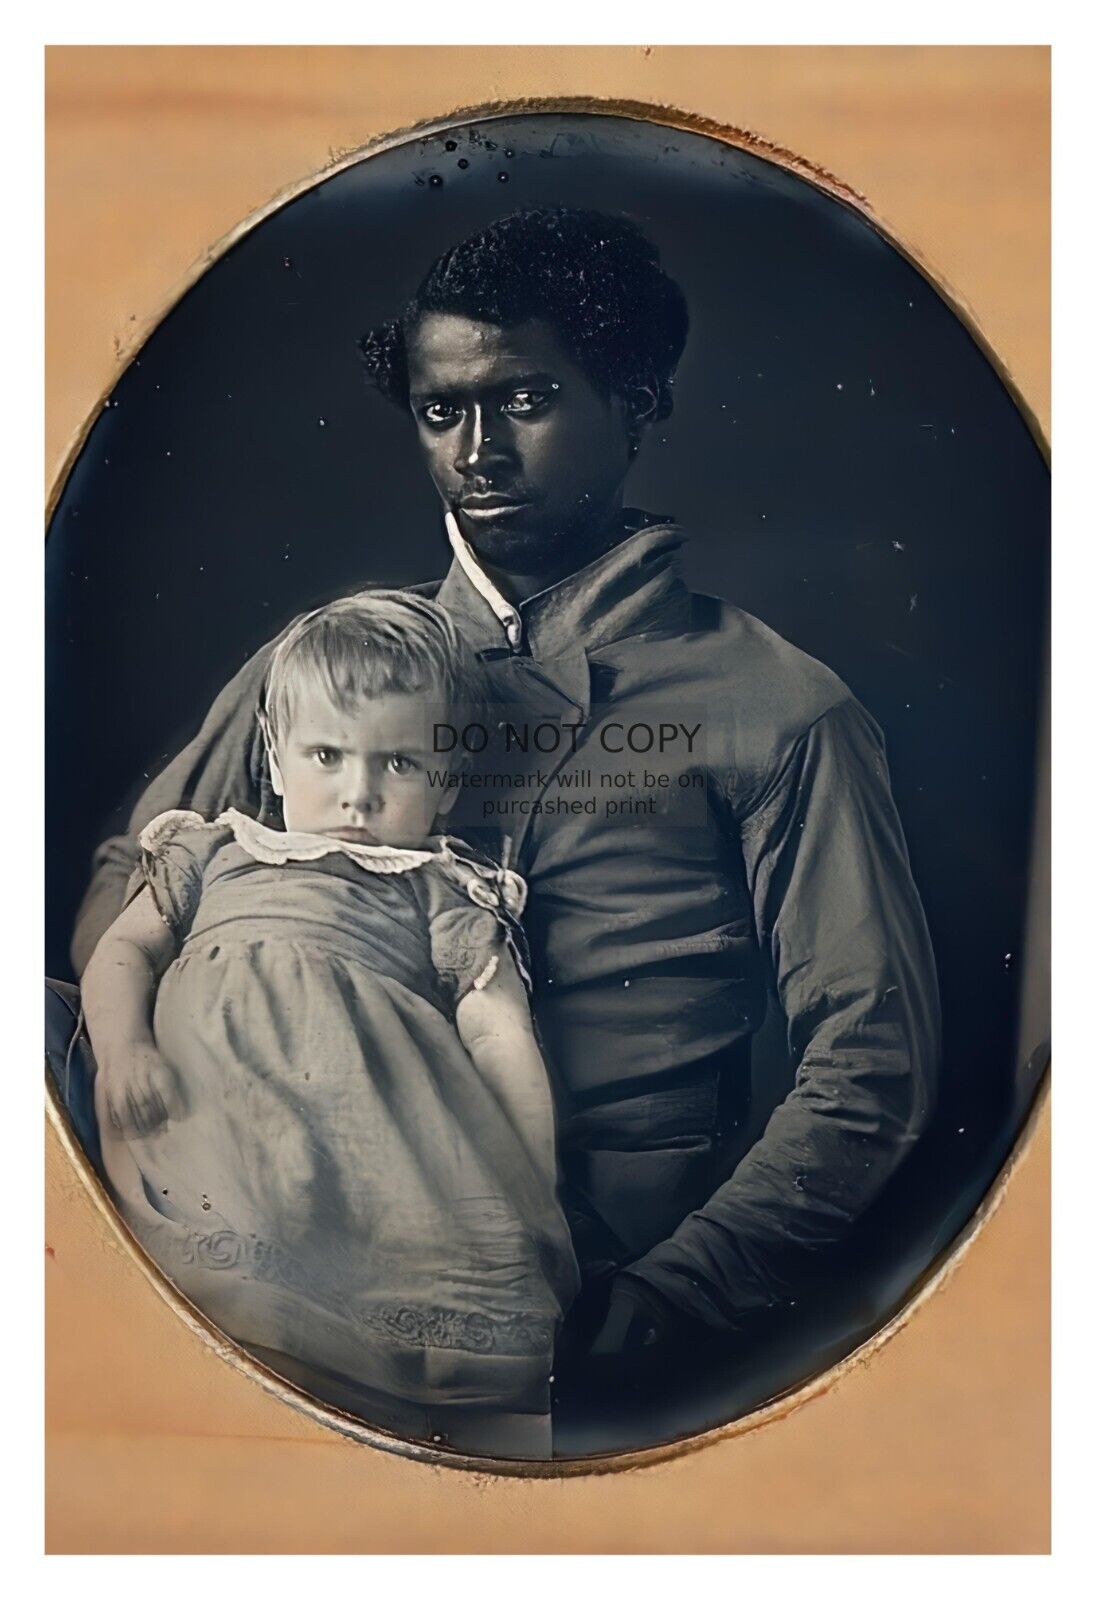 AFRICAN AMERICAN MAN NANNY WITH WHITE CHILD 1800s 4X6 PHOTO